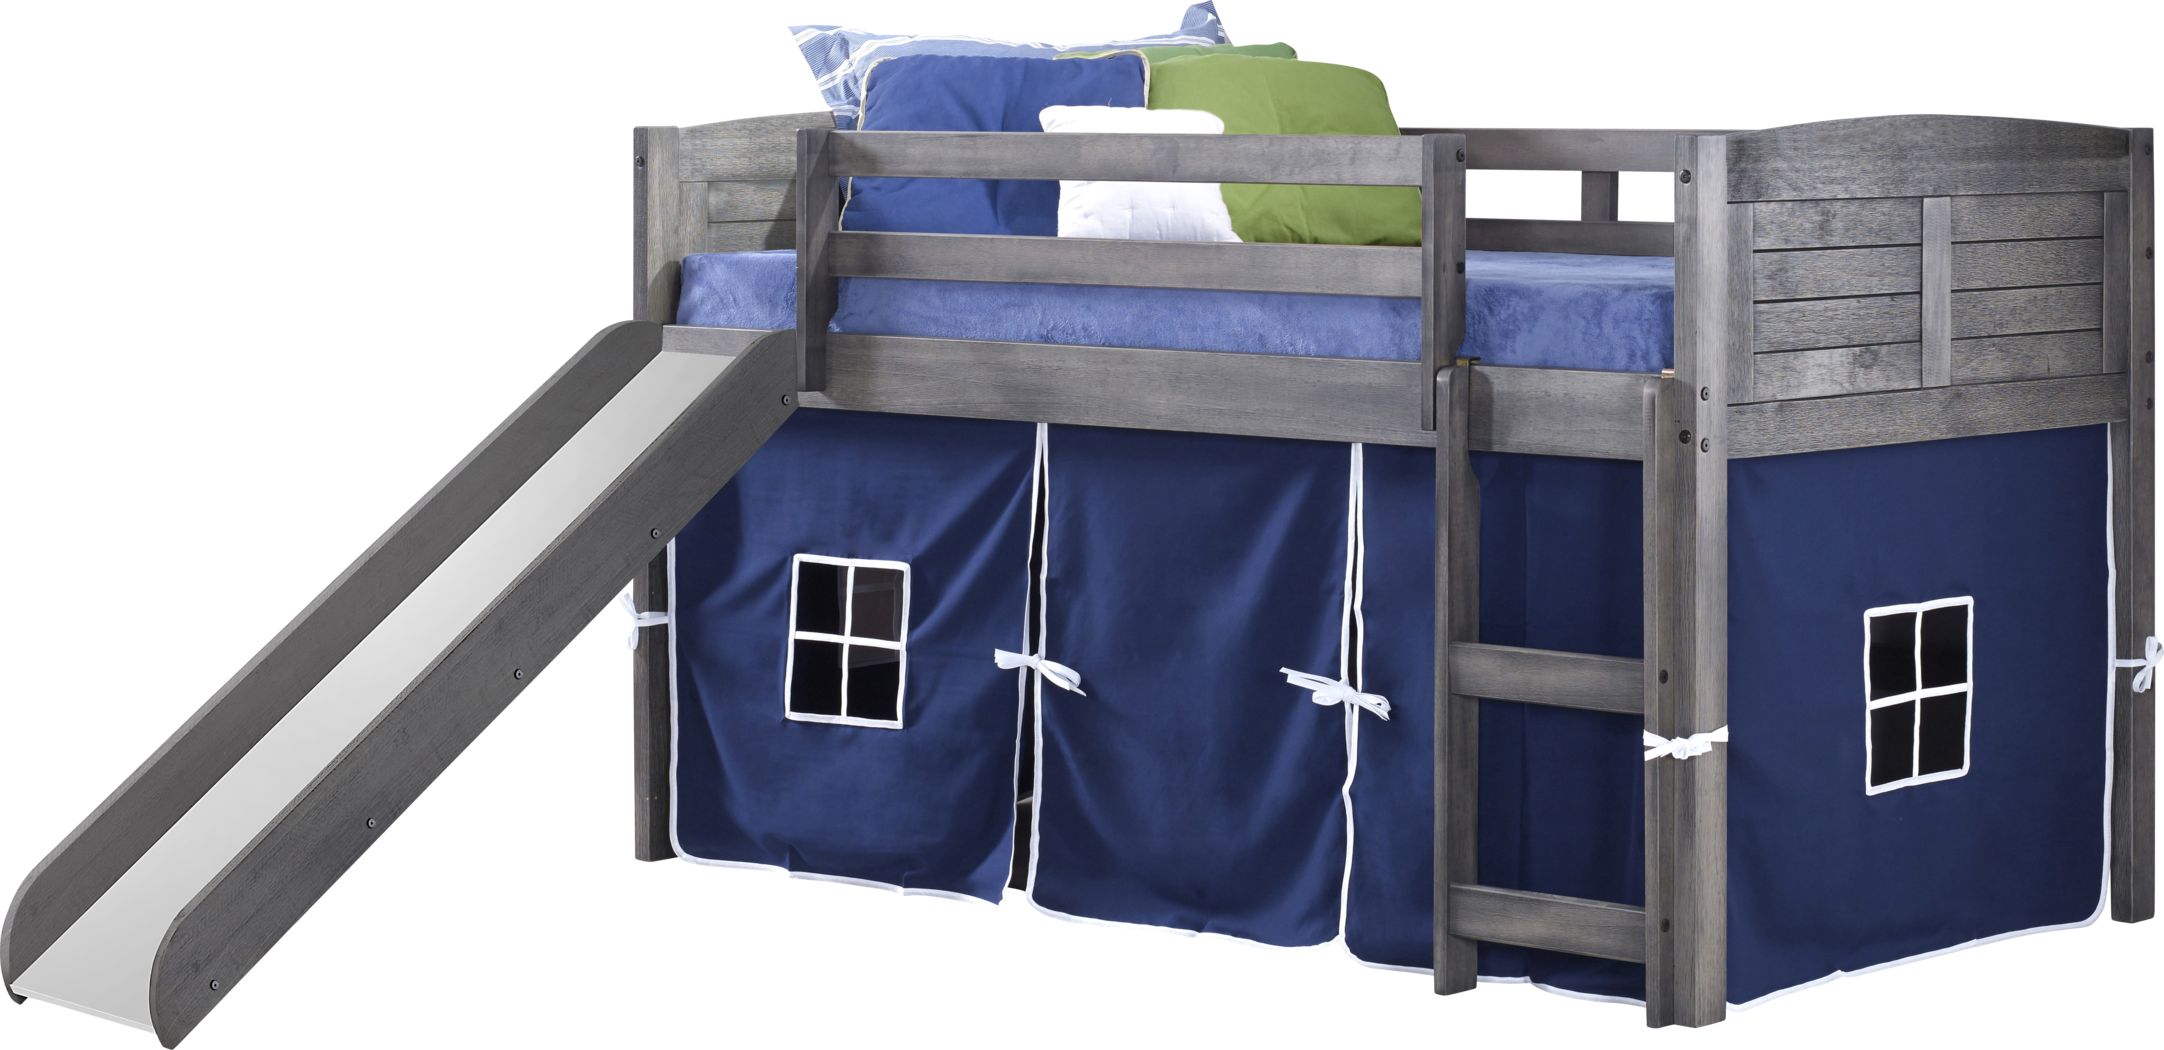 Bunk Beds For Kids, Rooms To Go Bunk Bed With Futon